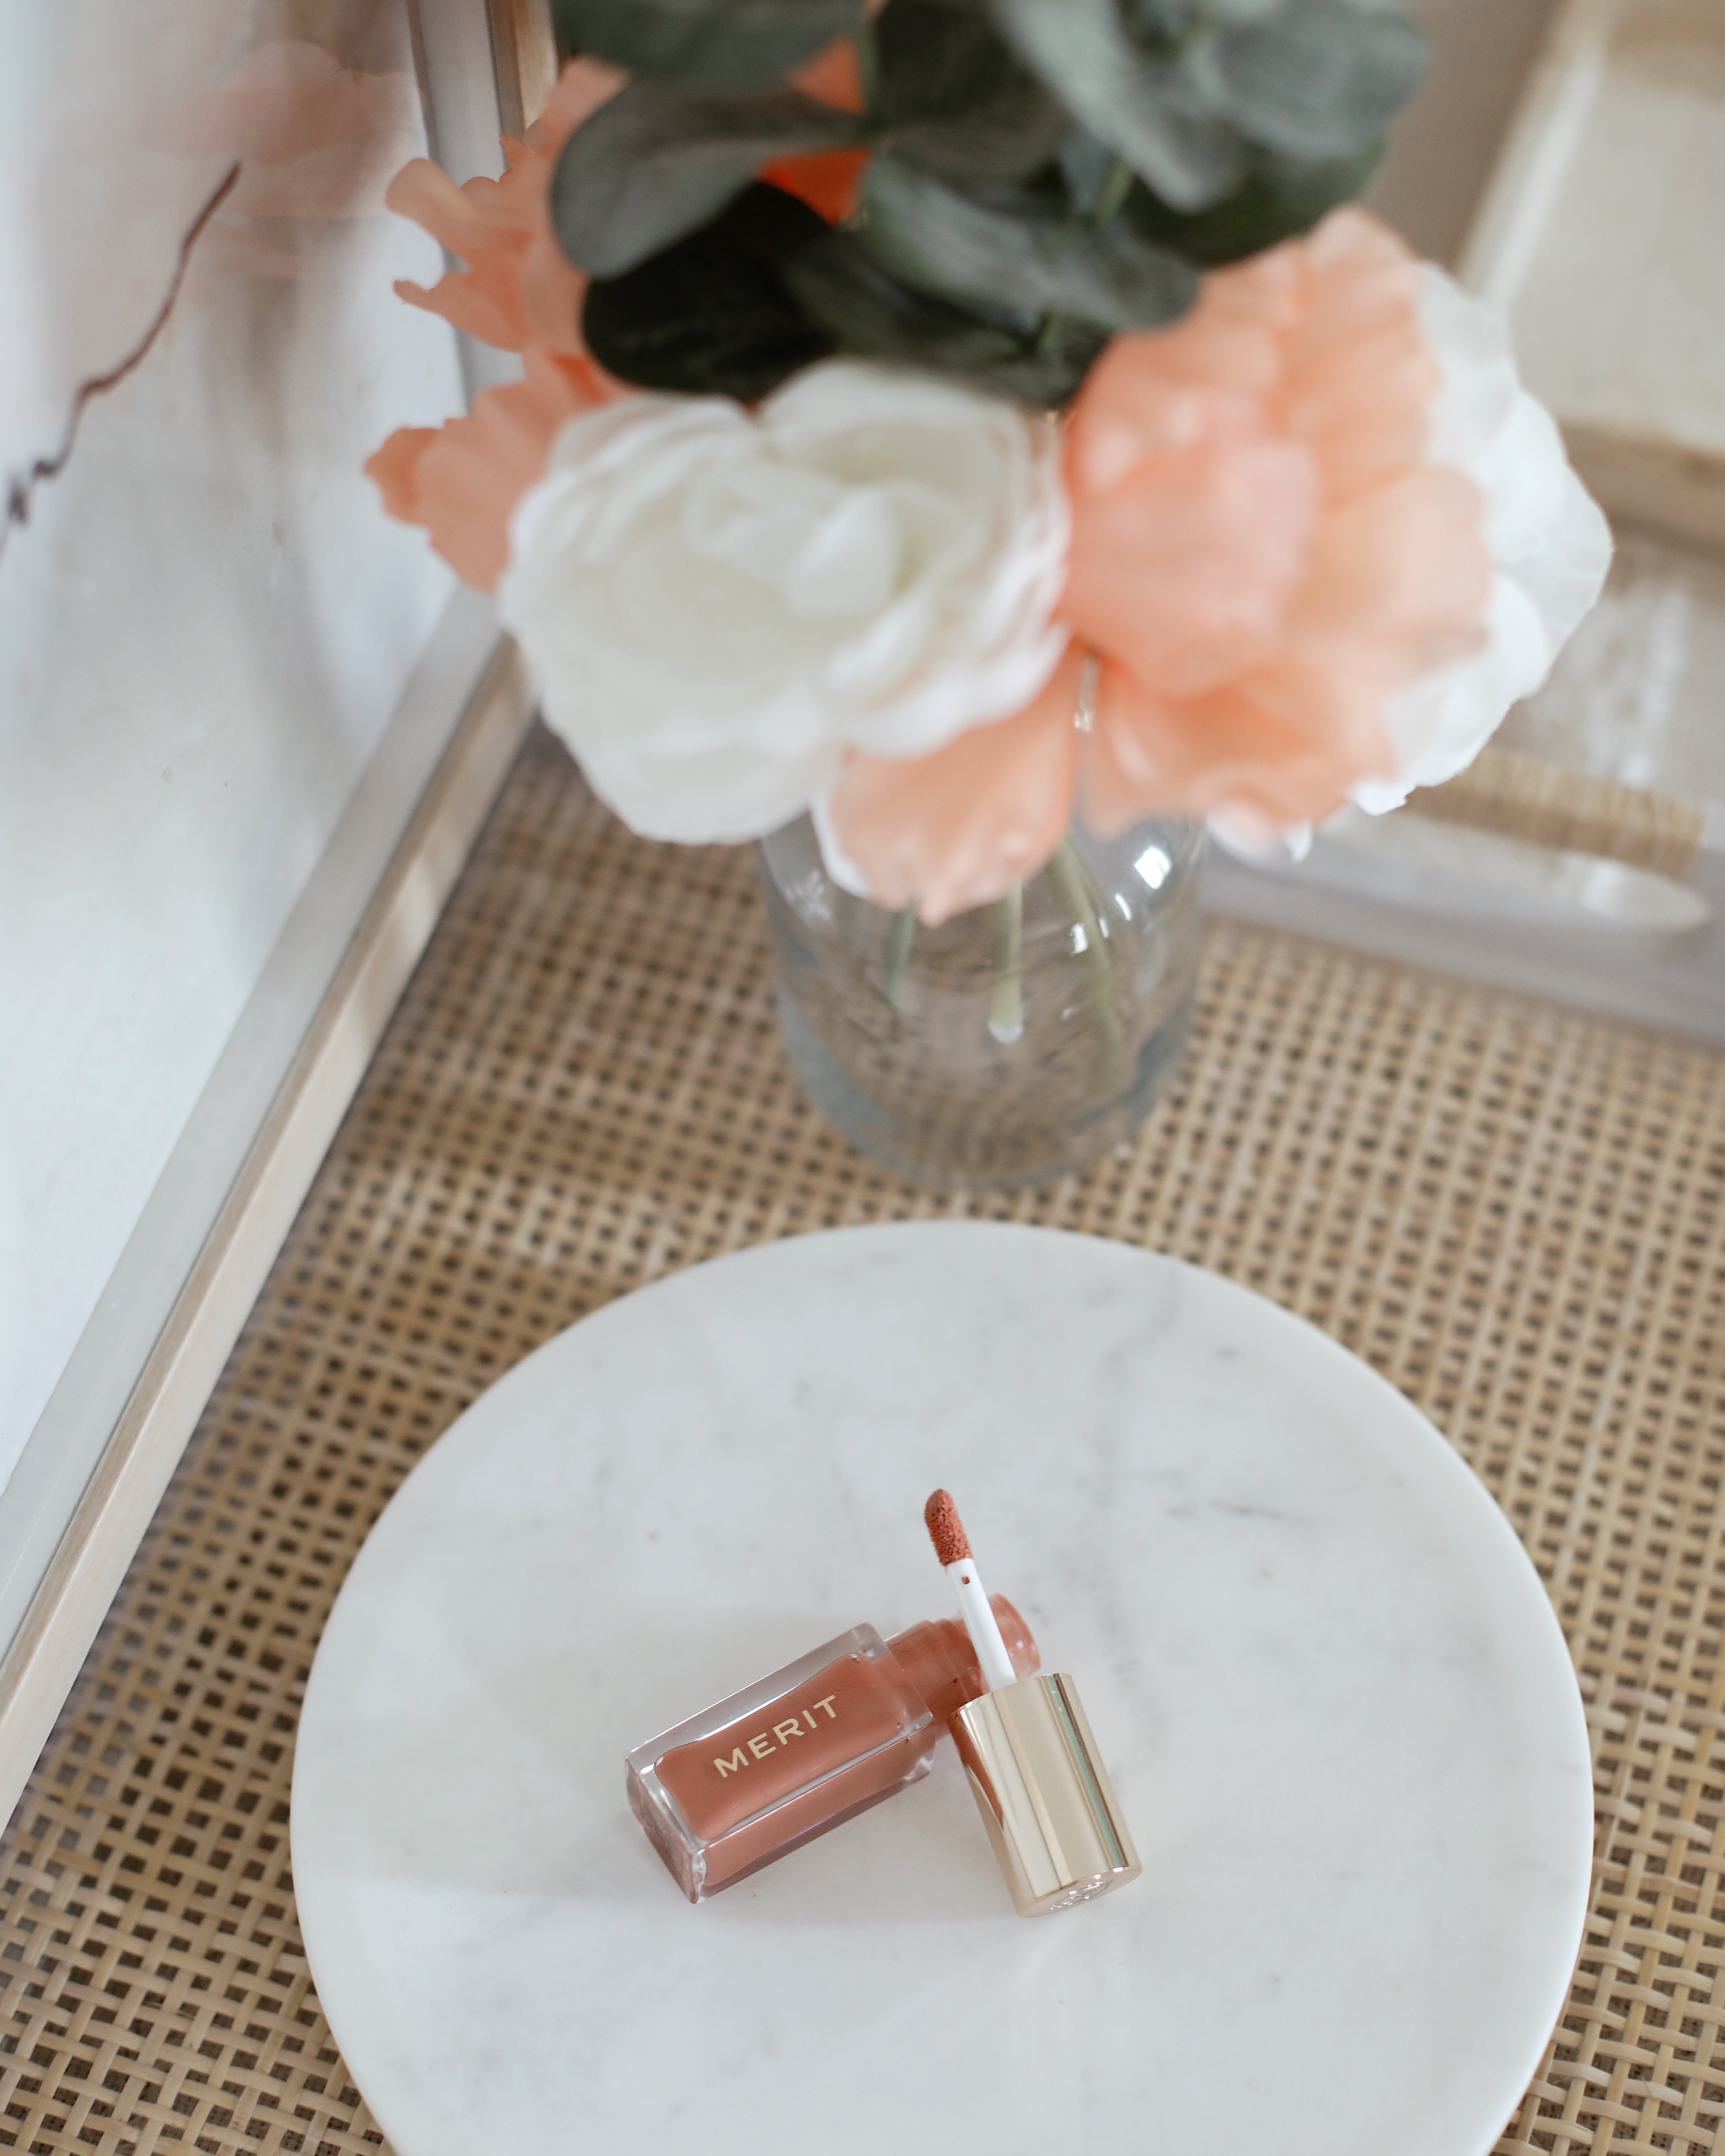 MERIT Shade Slick Tinted Lip Oil - 5 Recent Summer Makeup Purchases from Sephora | Affordable by Amanda